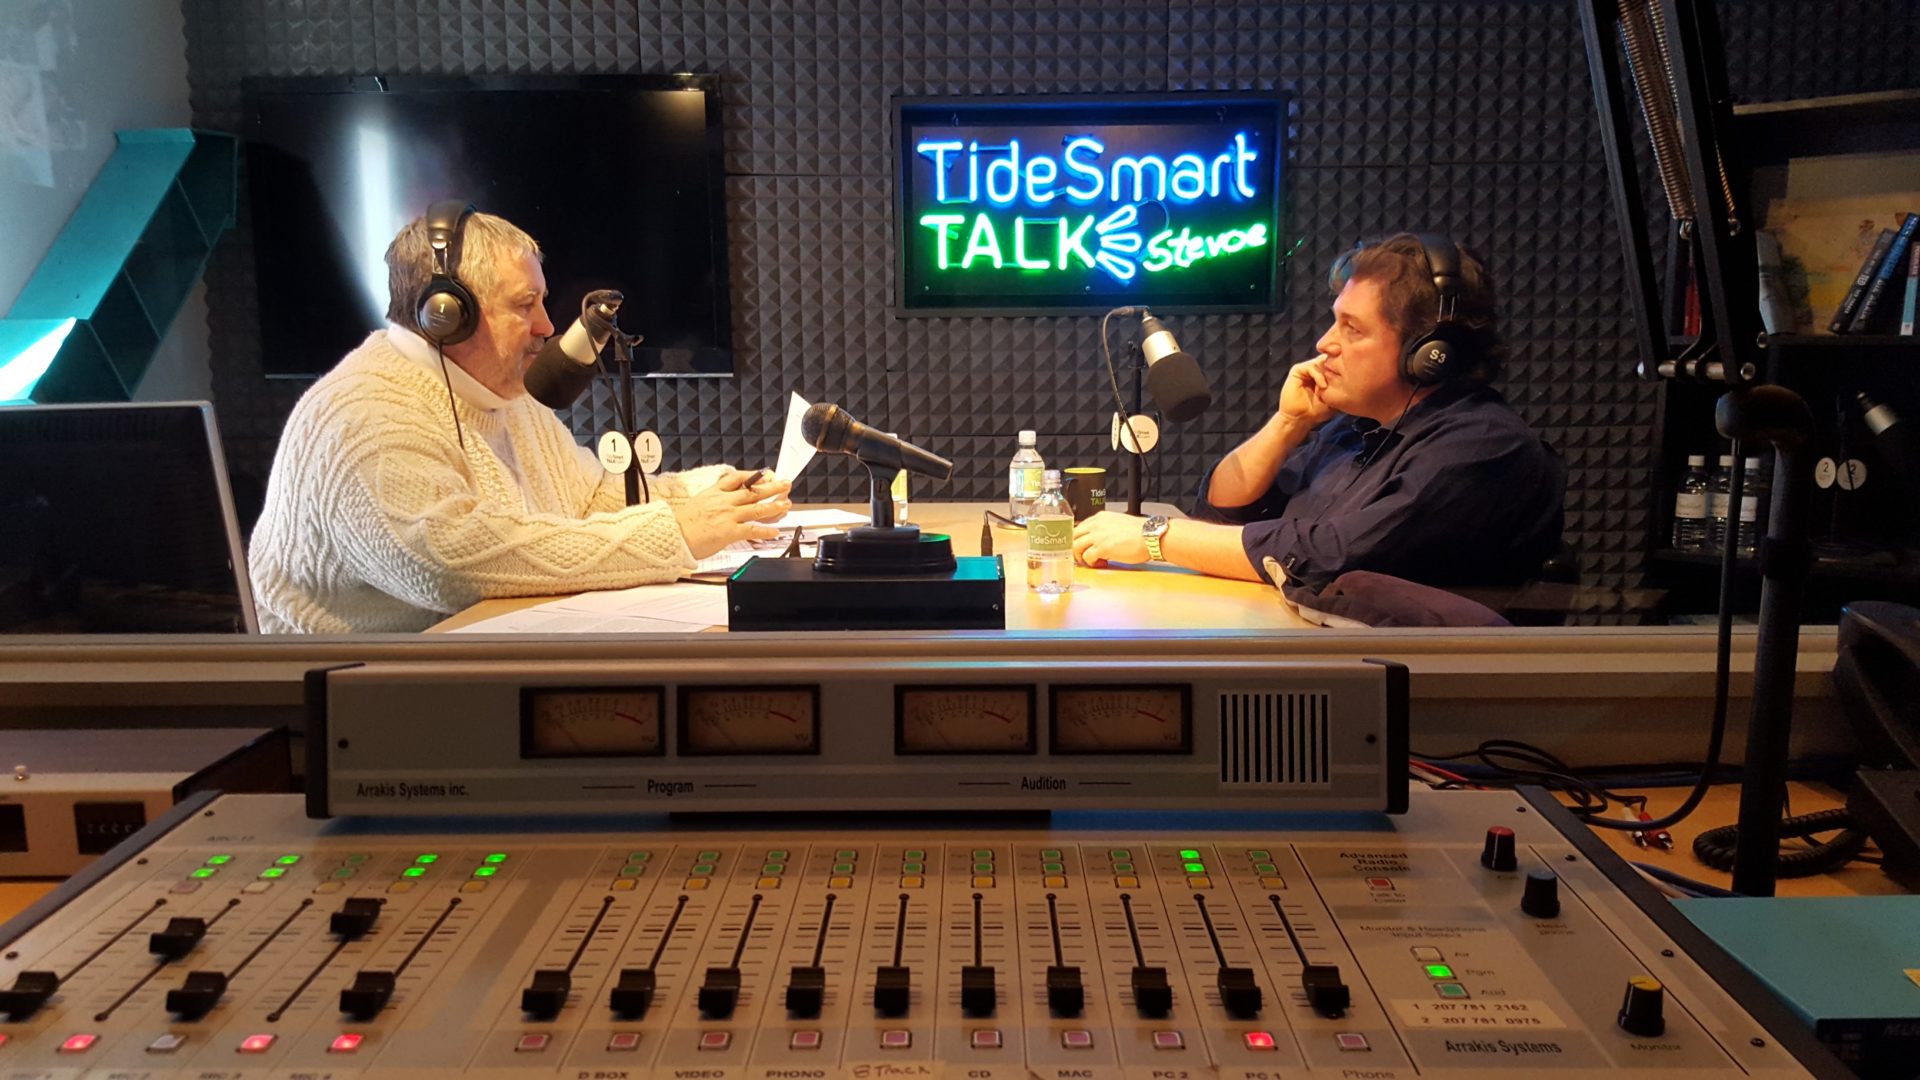 Host of TideSmart Talk with Stevoe, Steve Woods, welcomed Medical Researcher at Maine Medical Center's Research Institute, Dr. Leif Oxburgh (at right).